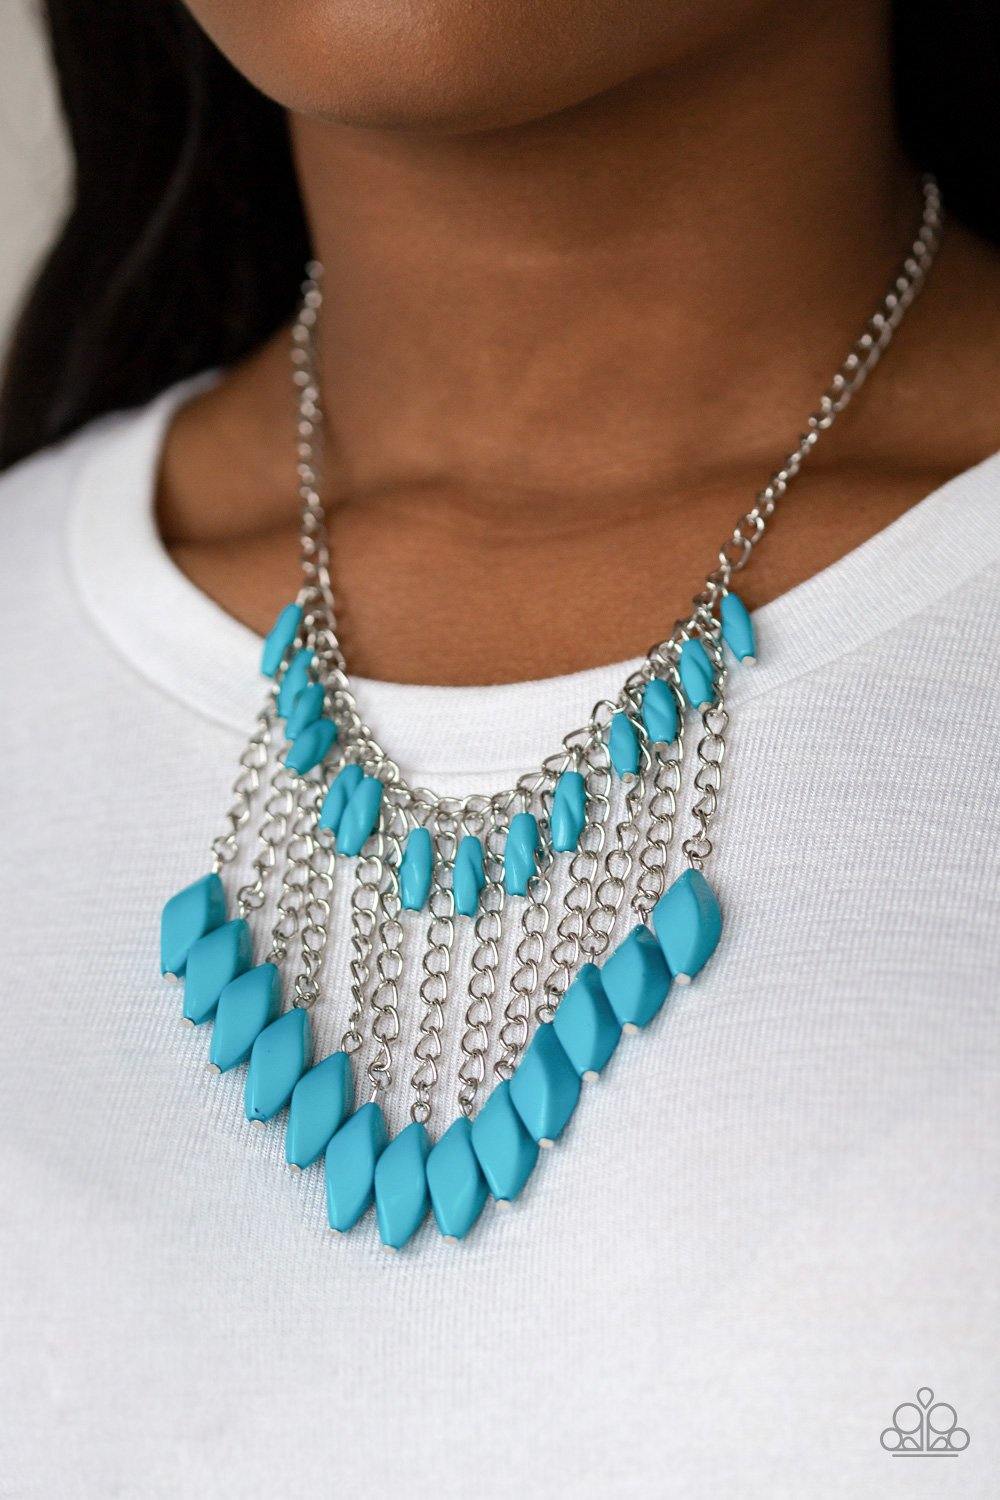 Venturous Vibes - Blue Necklace - Paparazzi Accessories - Sassysblingandthings